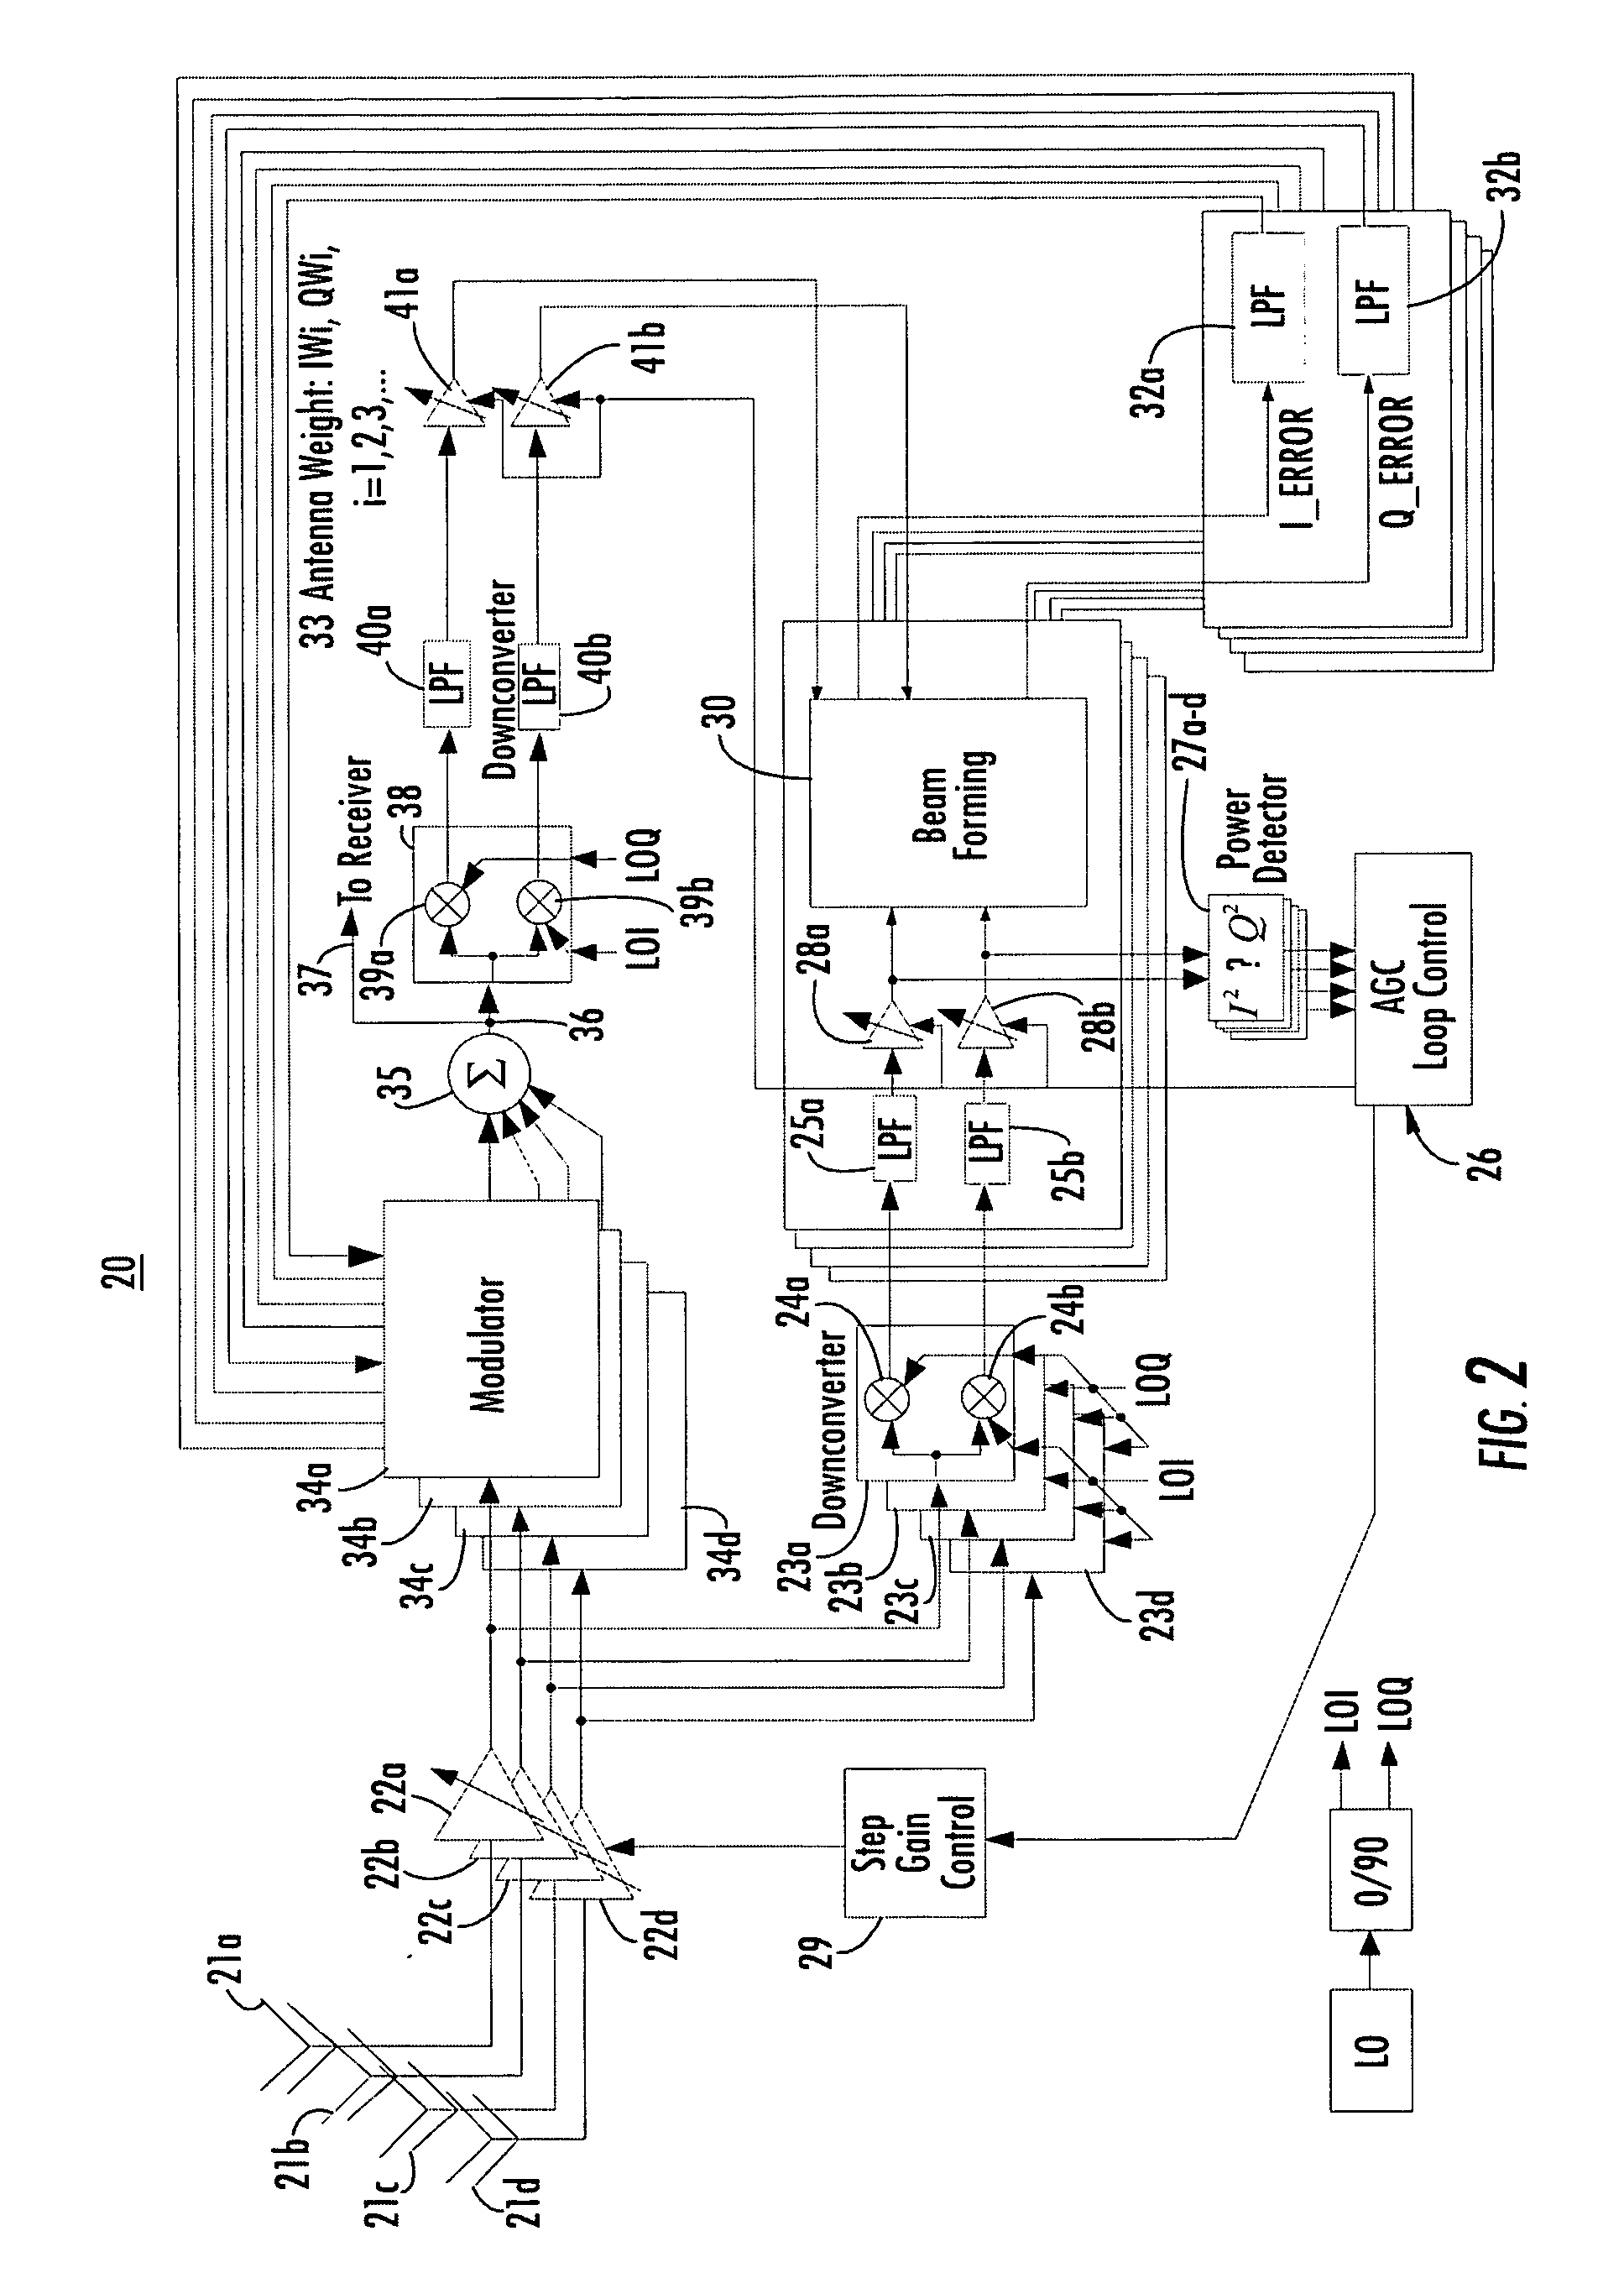 Wireless communication system using a plurality of antenna elements with adaptive weighting and combining techniques